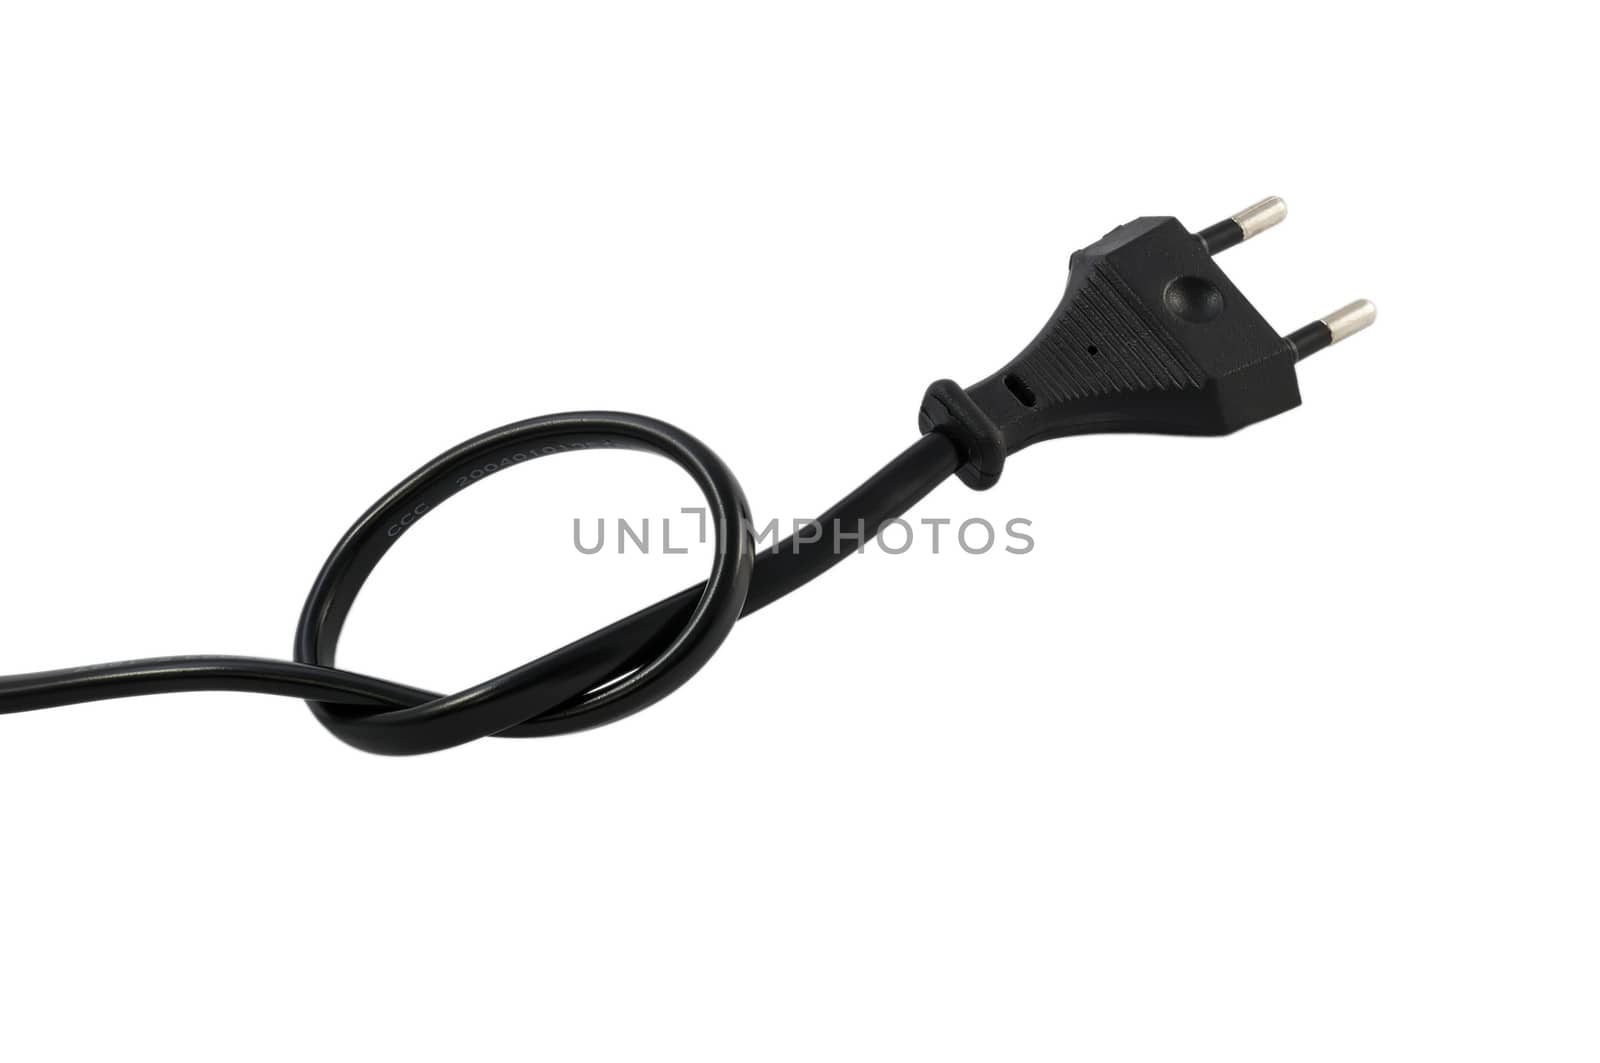 Black power cable with plug knotted on white background